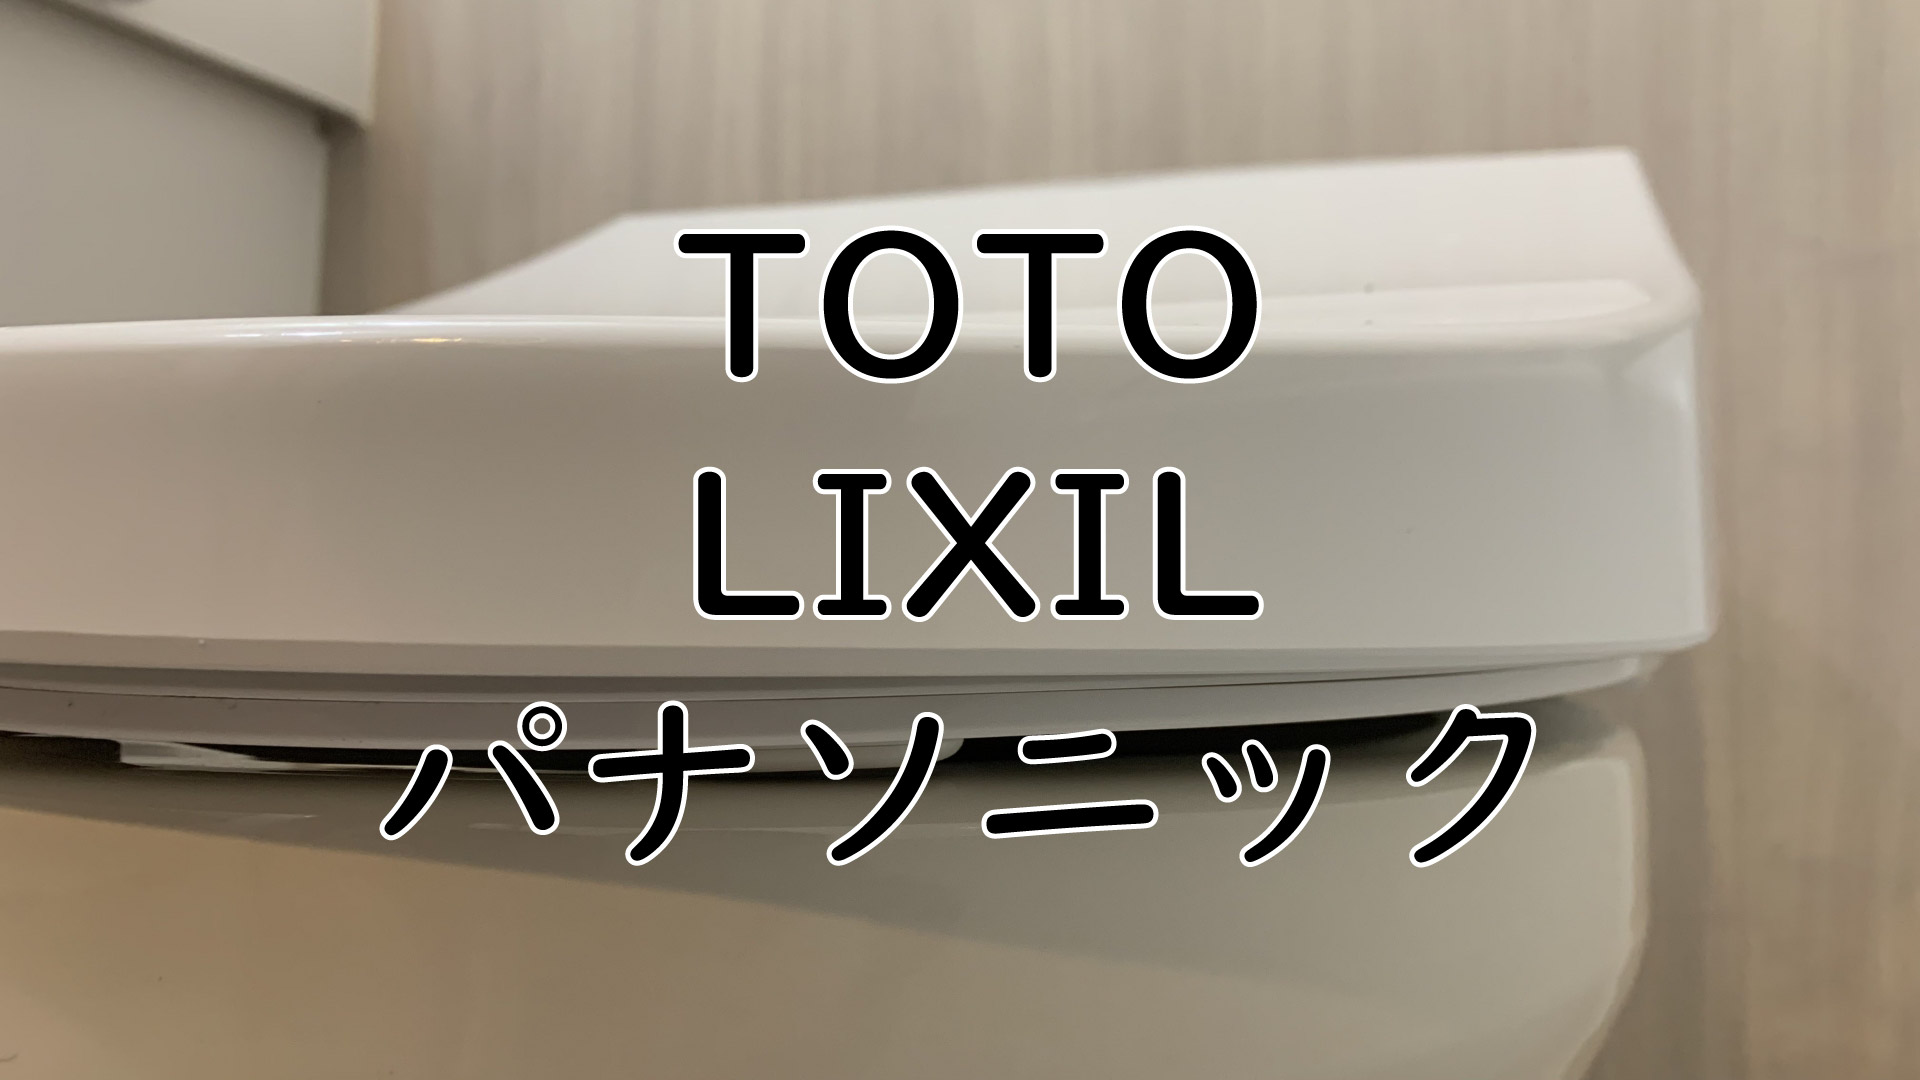 TOTO・LIXIL・パナソニック　主要メーカー3社のリセット方法